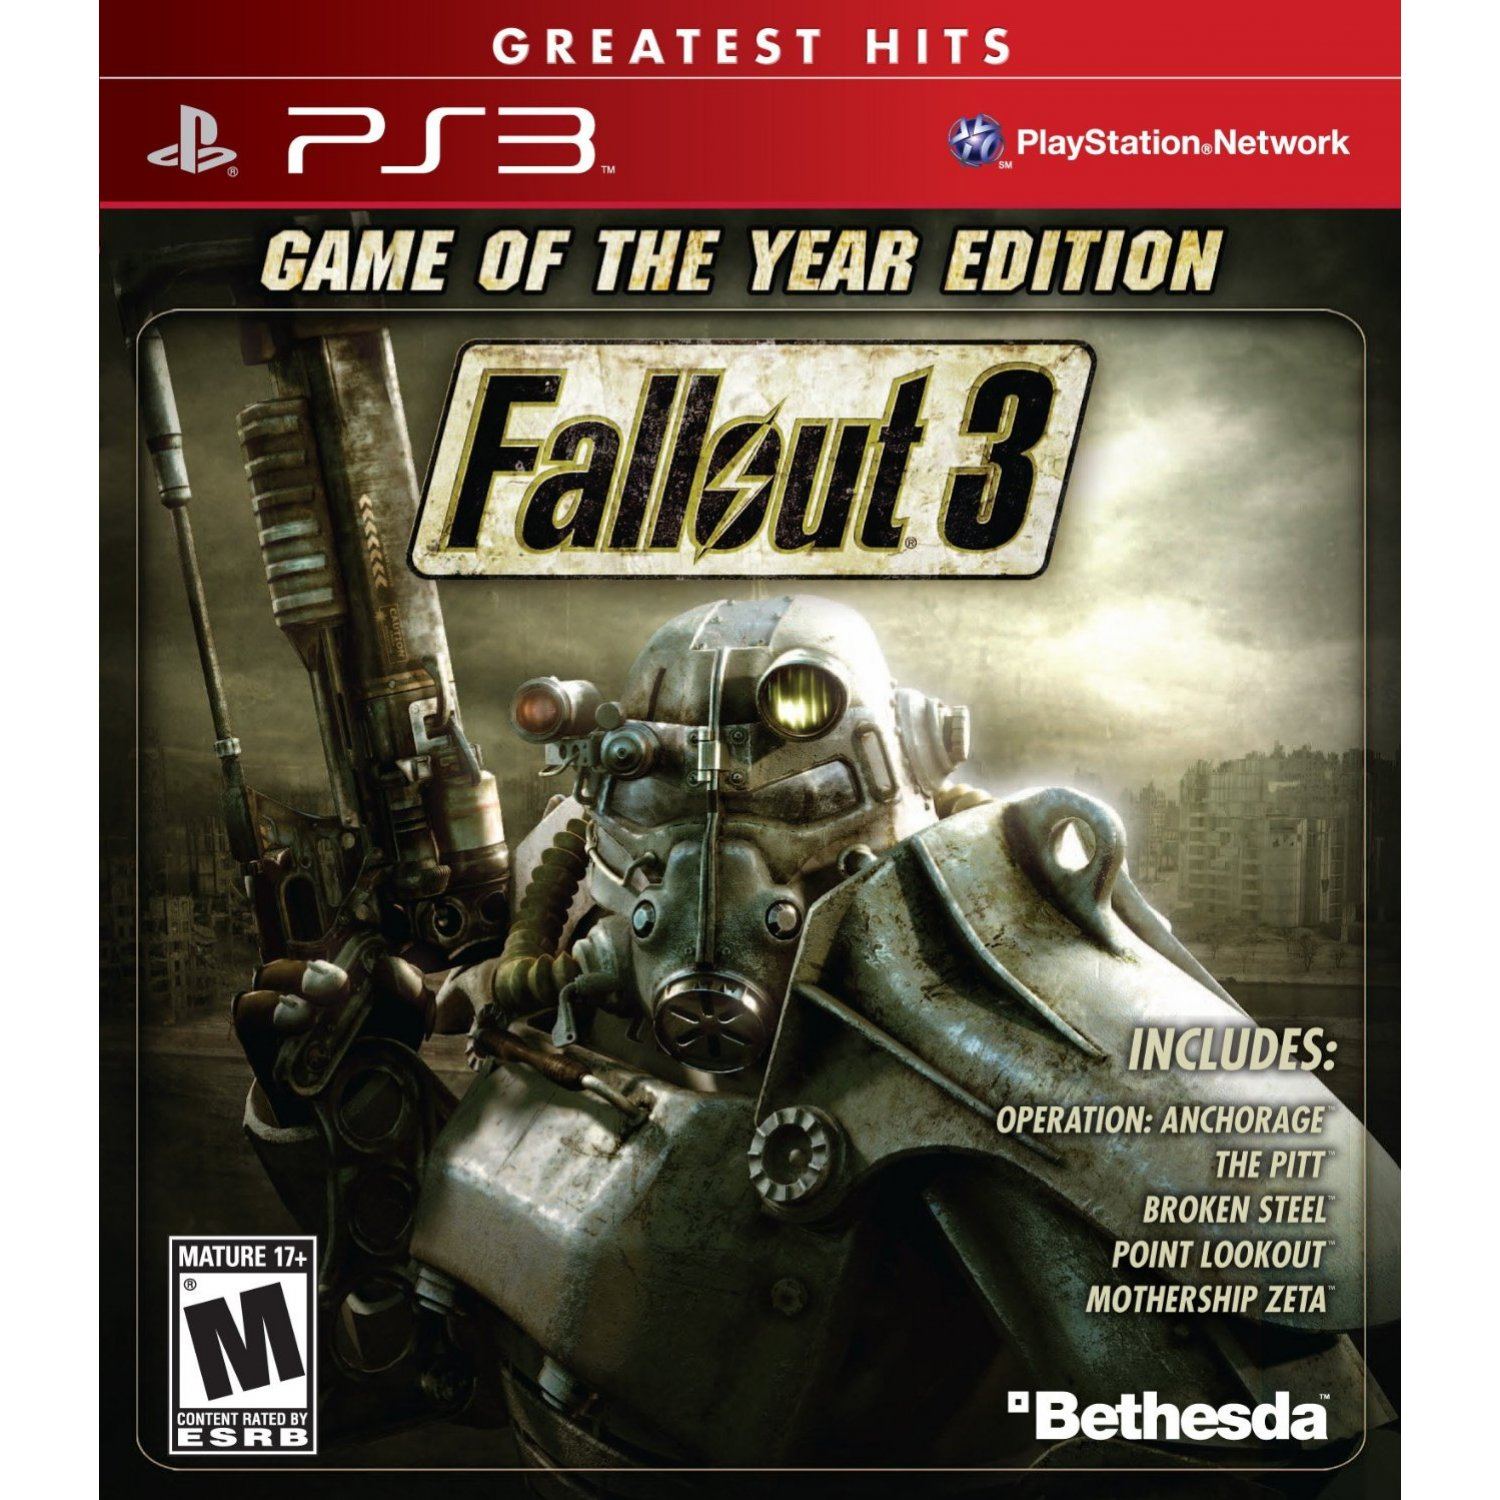 Fallout 3: Game of the Year Edition download the last version for windows